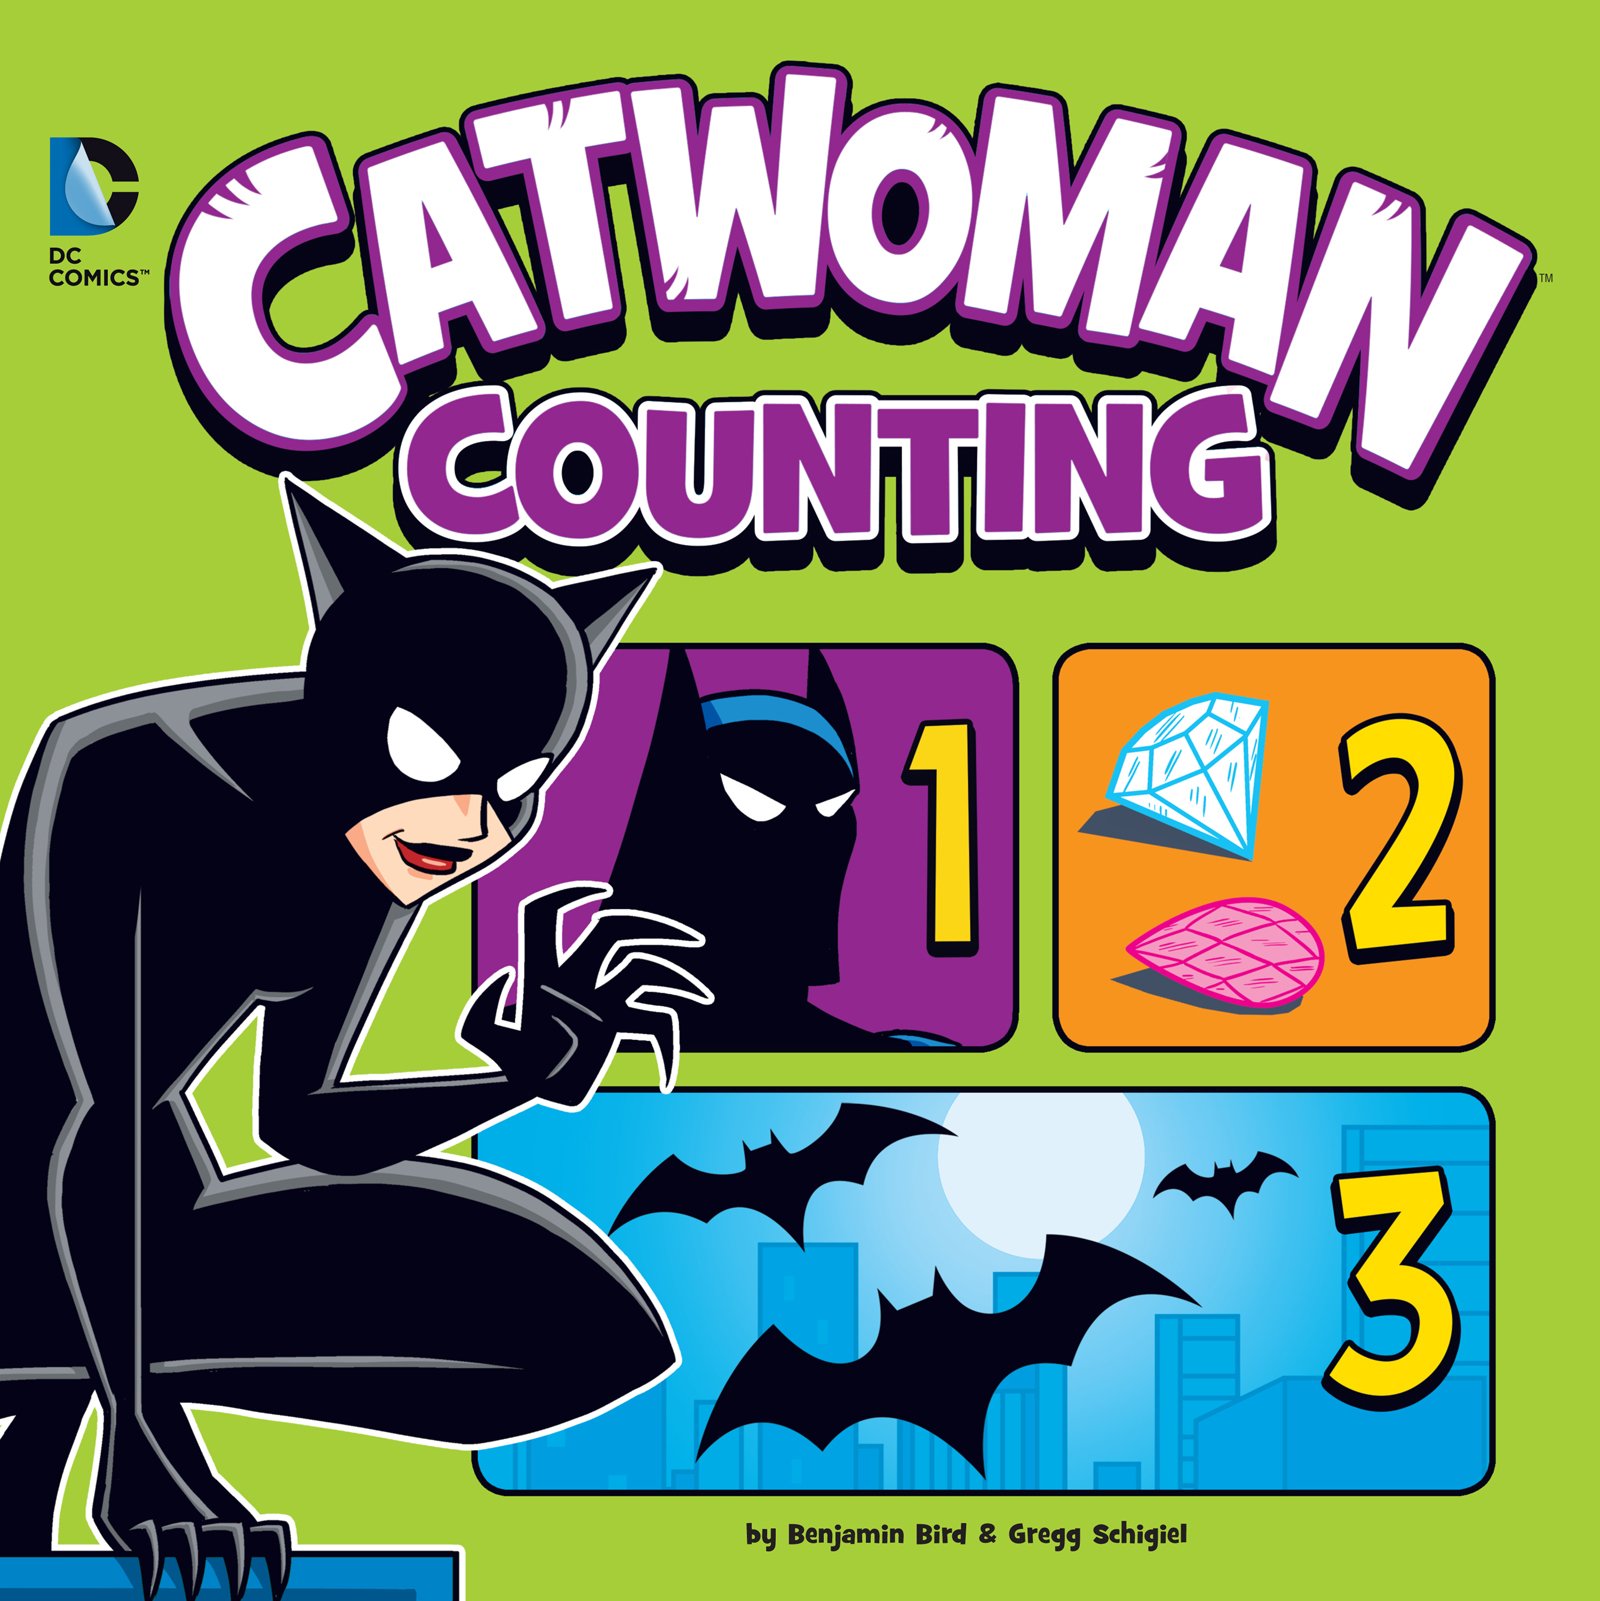 Catwoman Counting (DC Board Books)